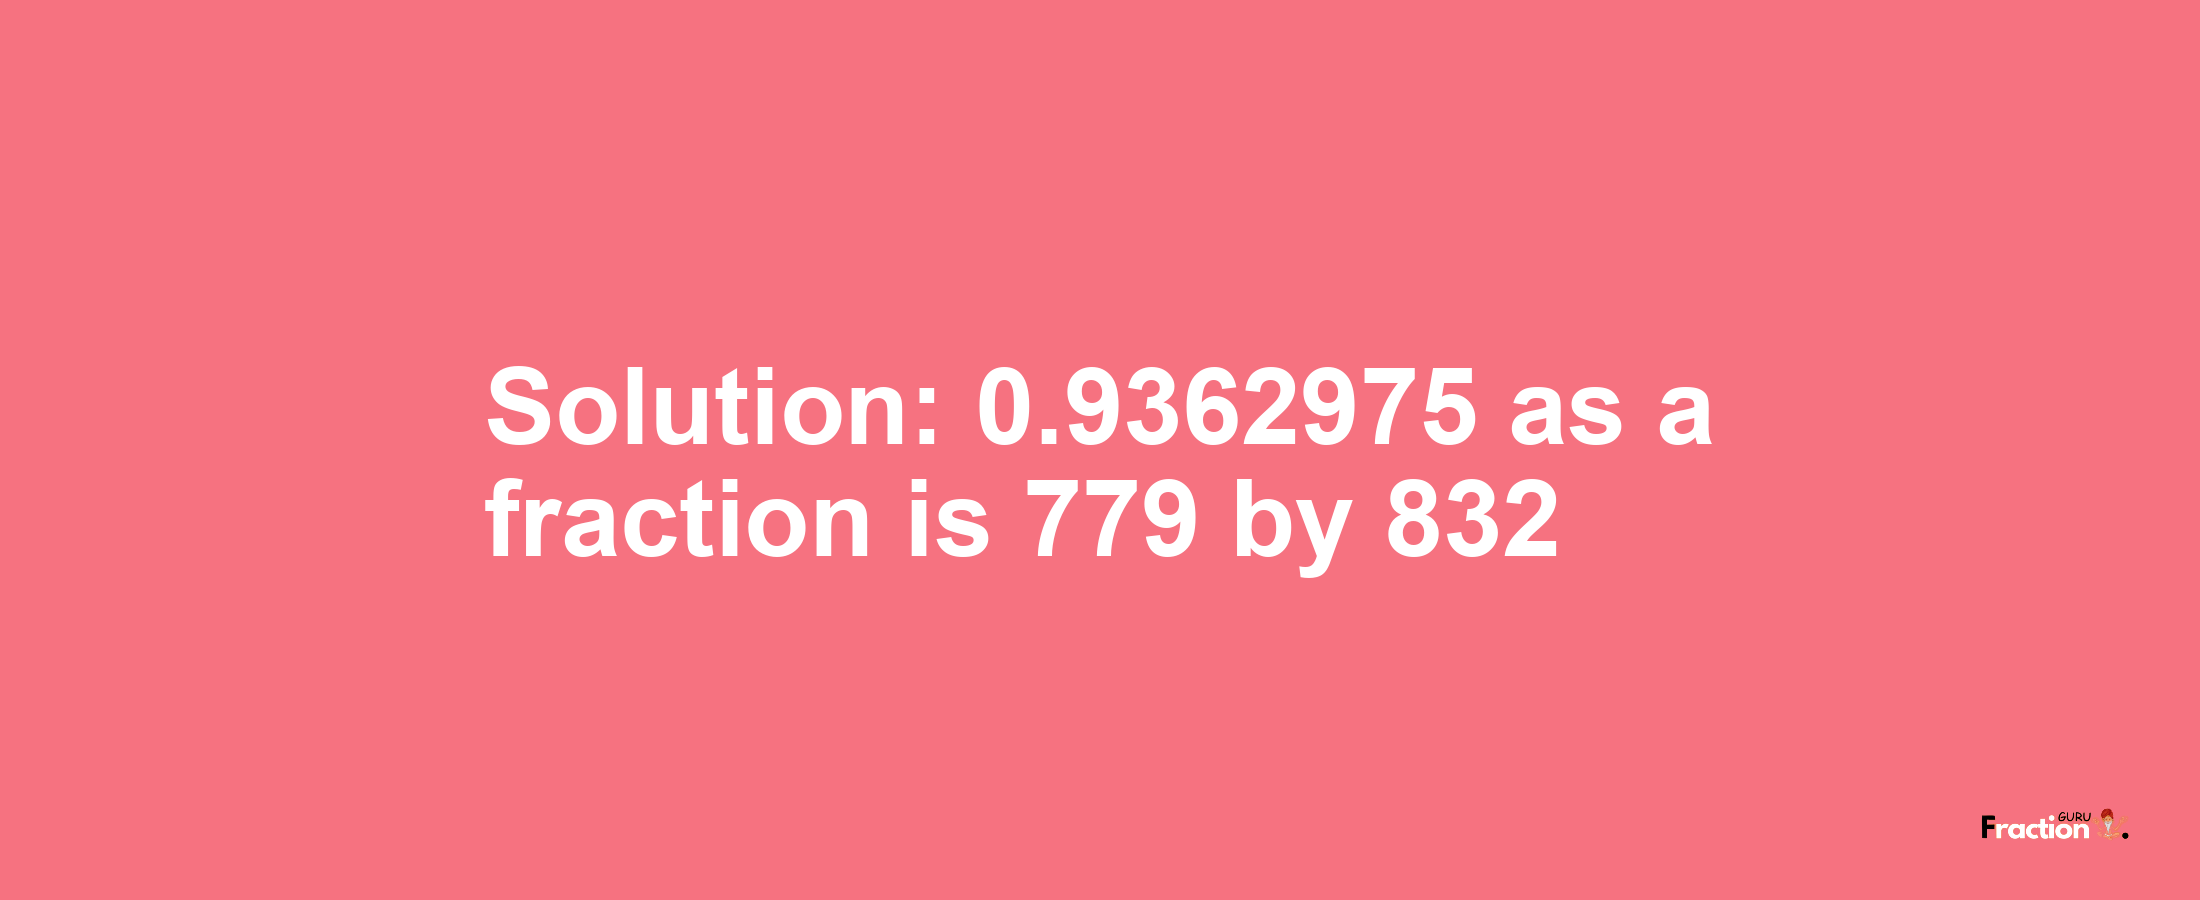 Solution:0.9362975 as a fraction is 779/832